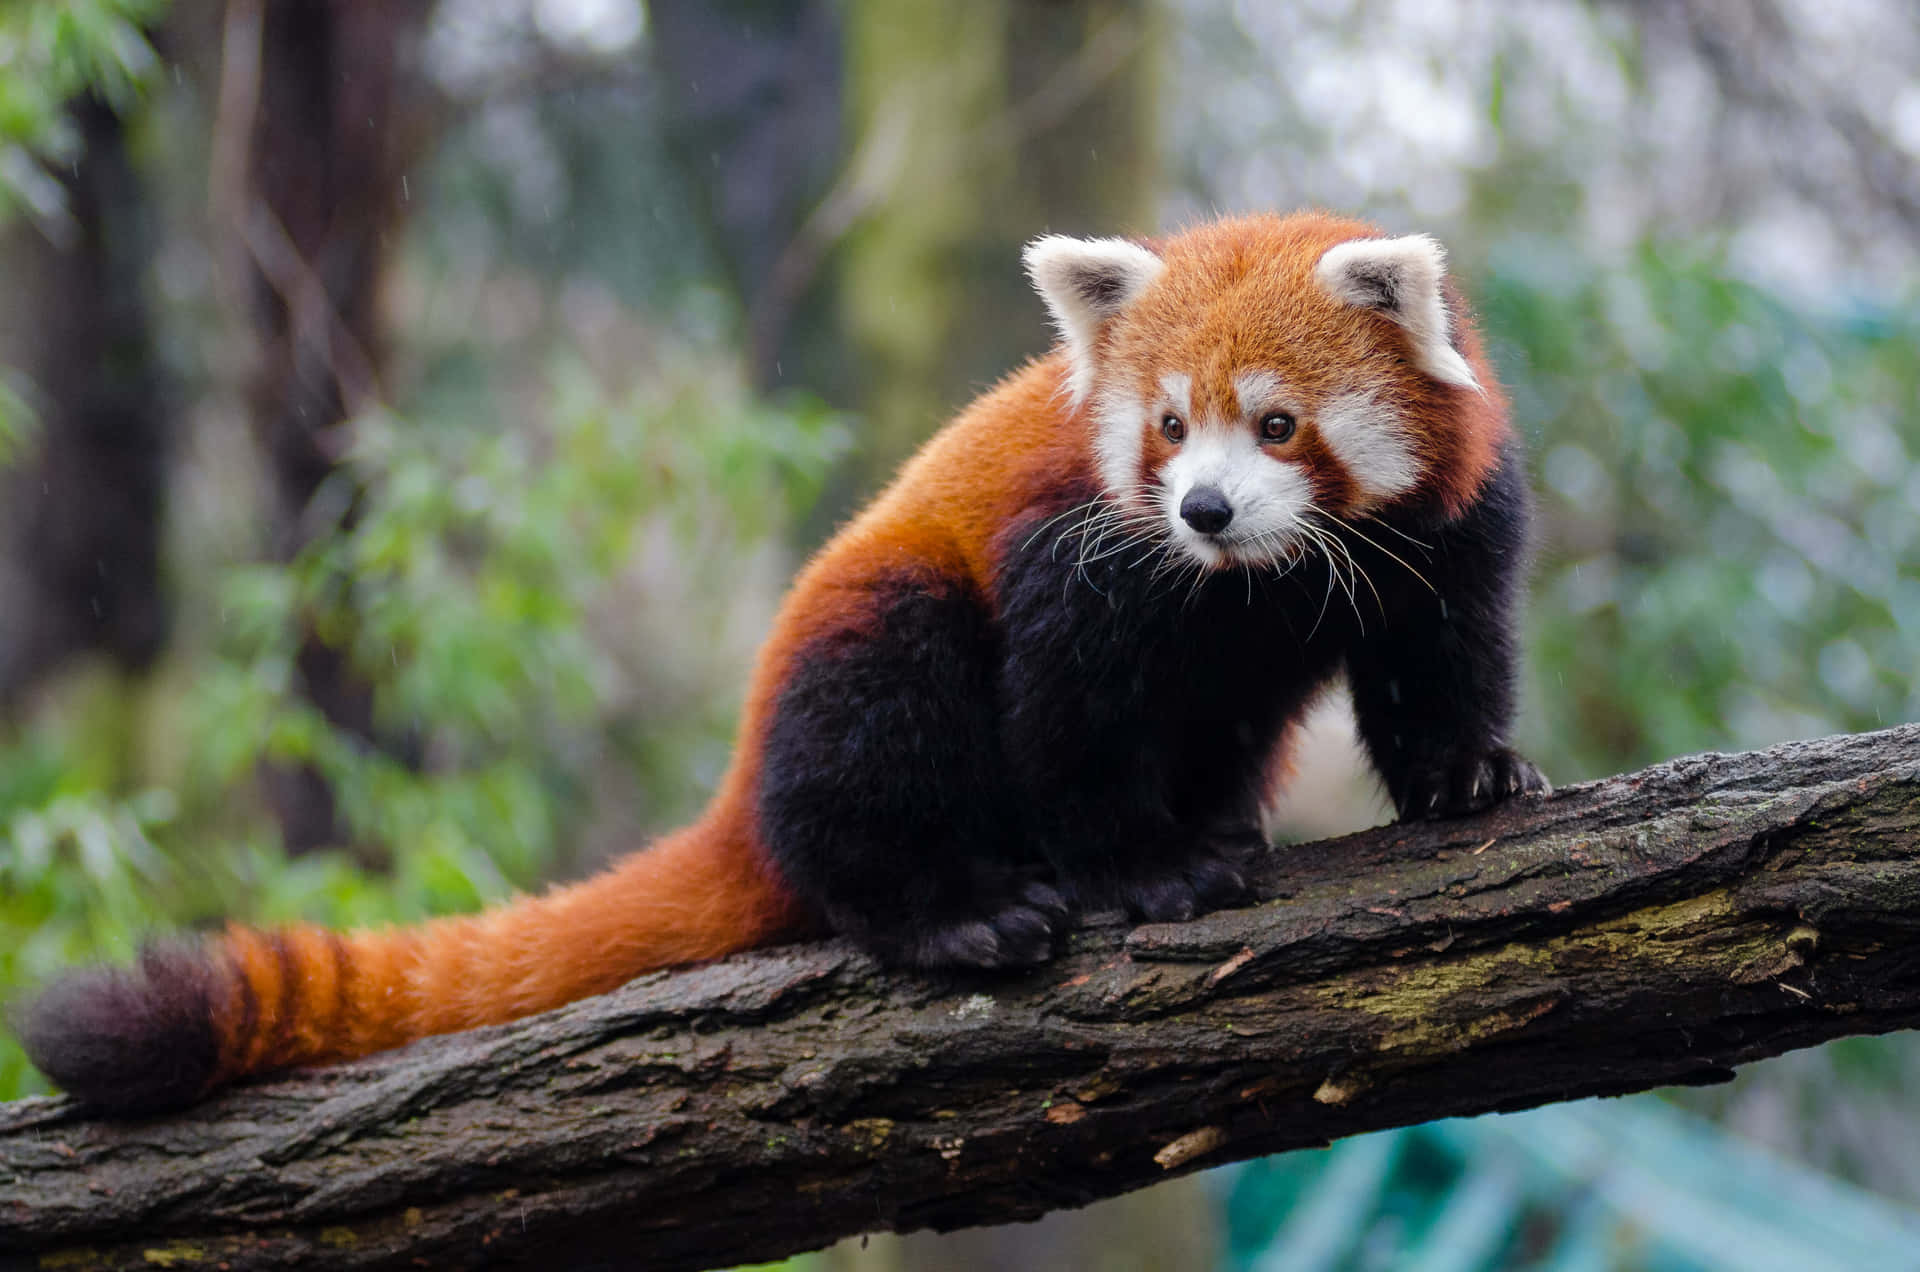 Enjoy the view of a red panda taking a nap in the bamboo forest.